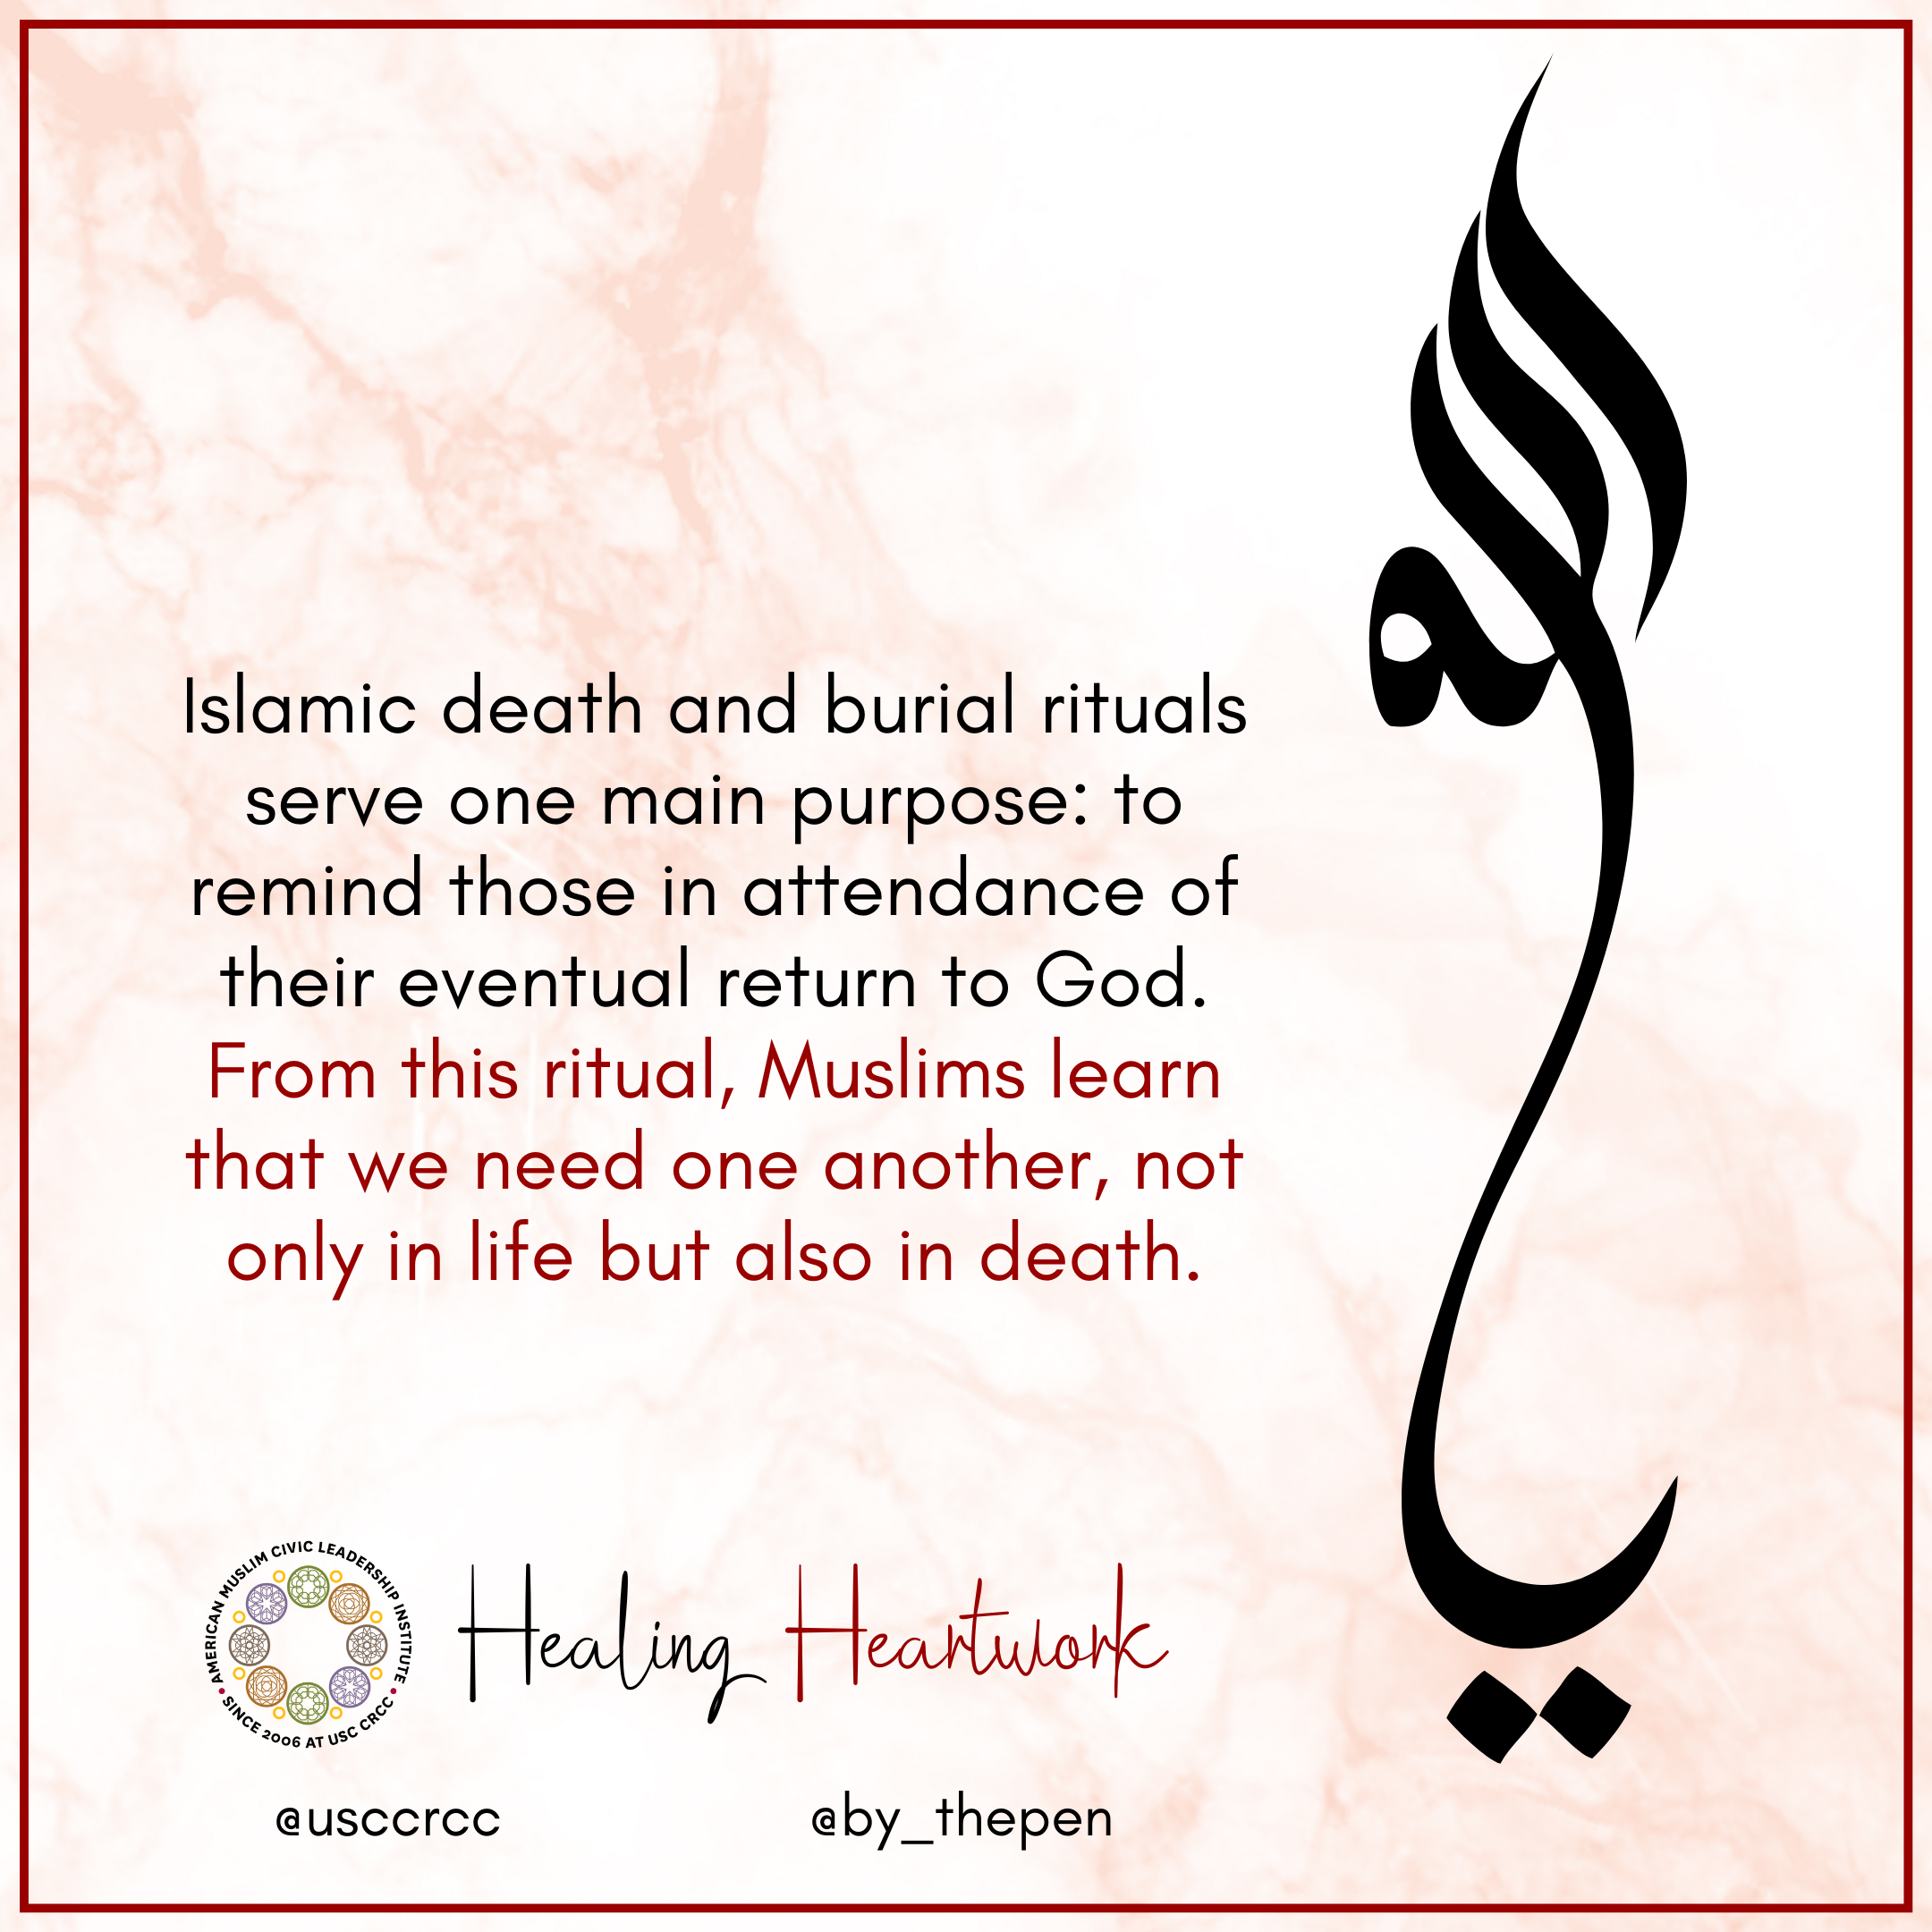 The journey of a Muslim believer (soul) after death – Islamic beliefs  according to hadith